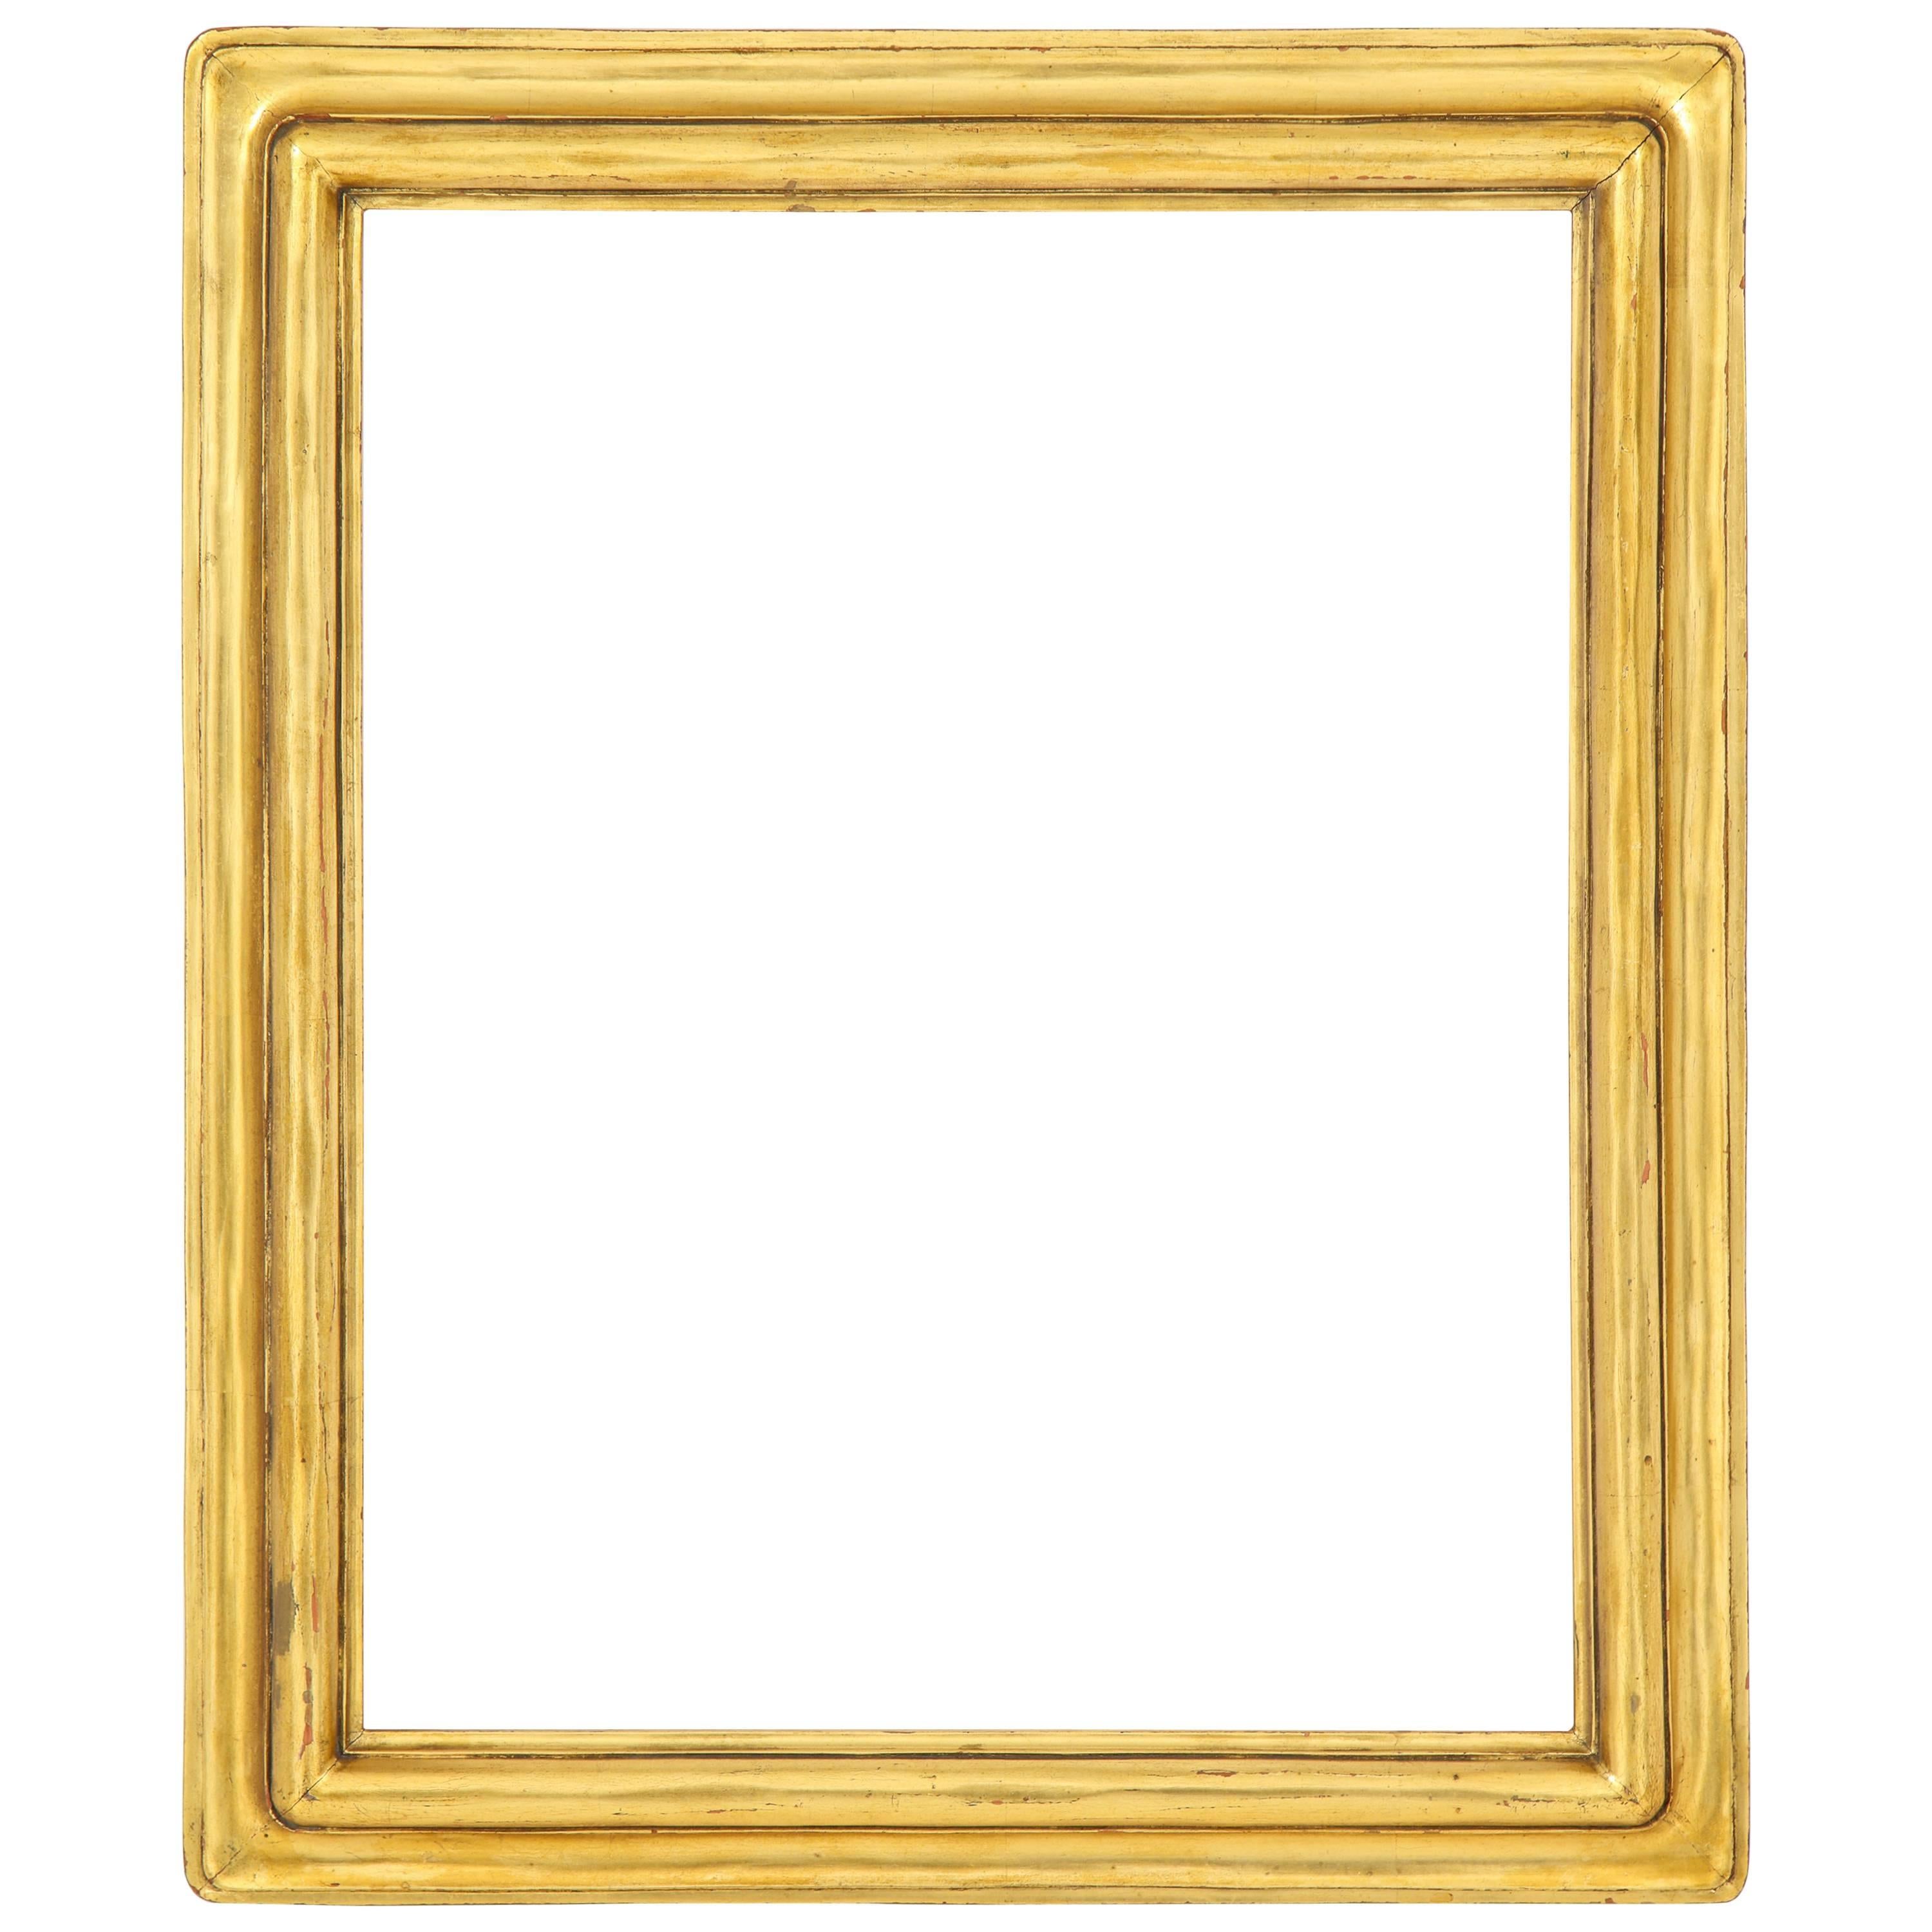 American Arts and Crafts Gilded Frame by Foster Brothers